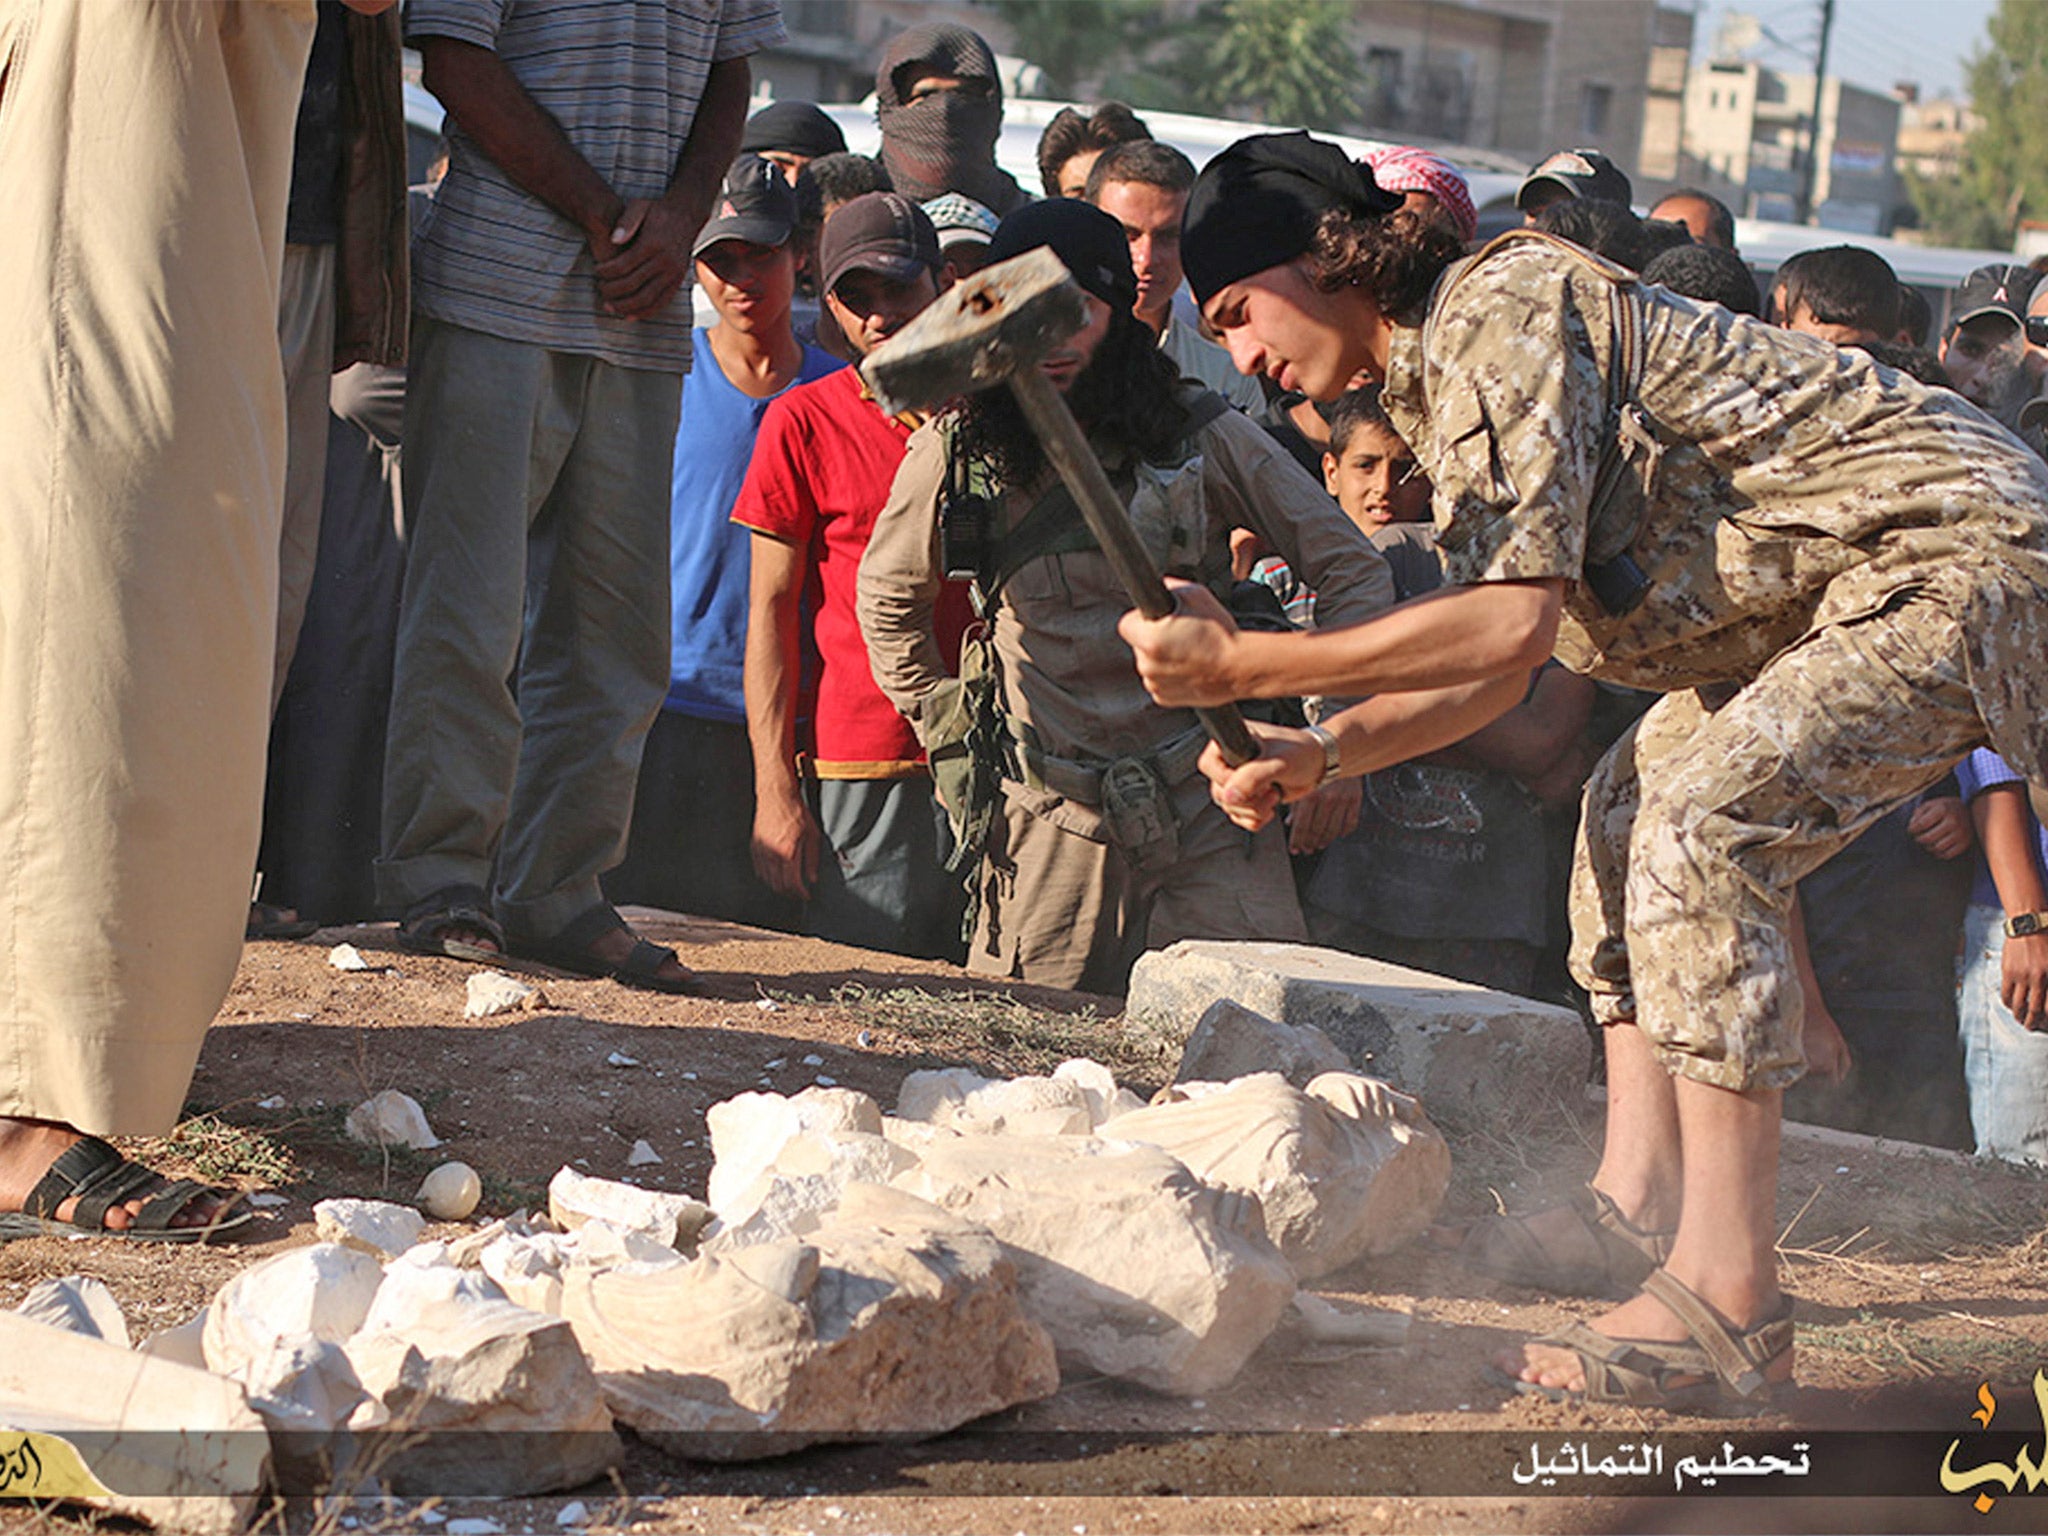 An image posted on an Isis affiliated website shows a militant smashing items from Palmyra